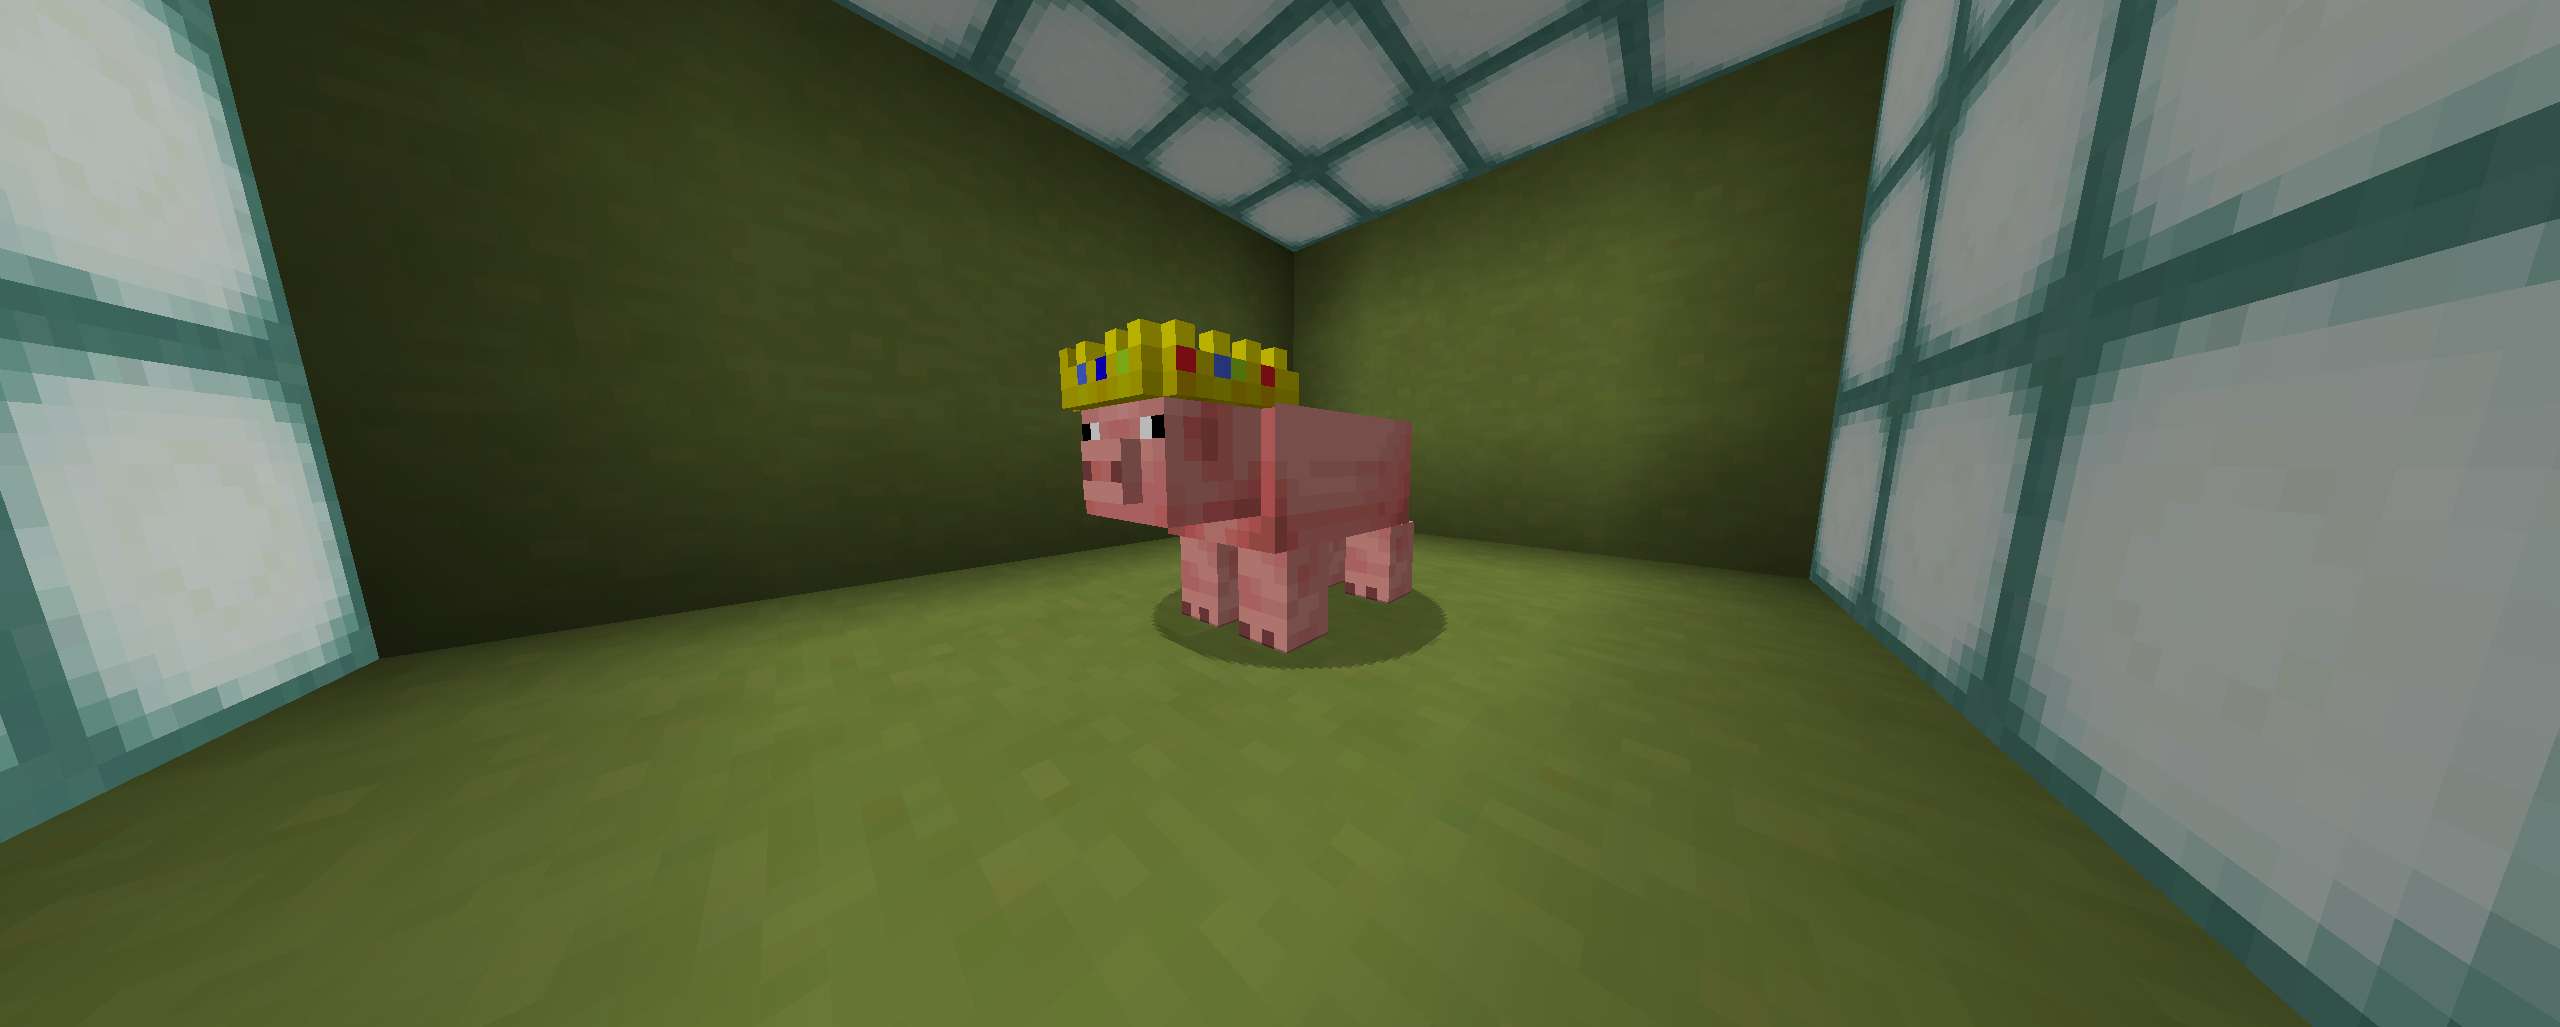 Gallery Image  Technoblade Pigs for MCPACKS